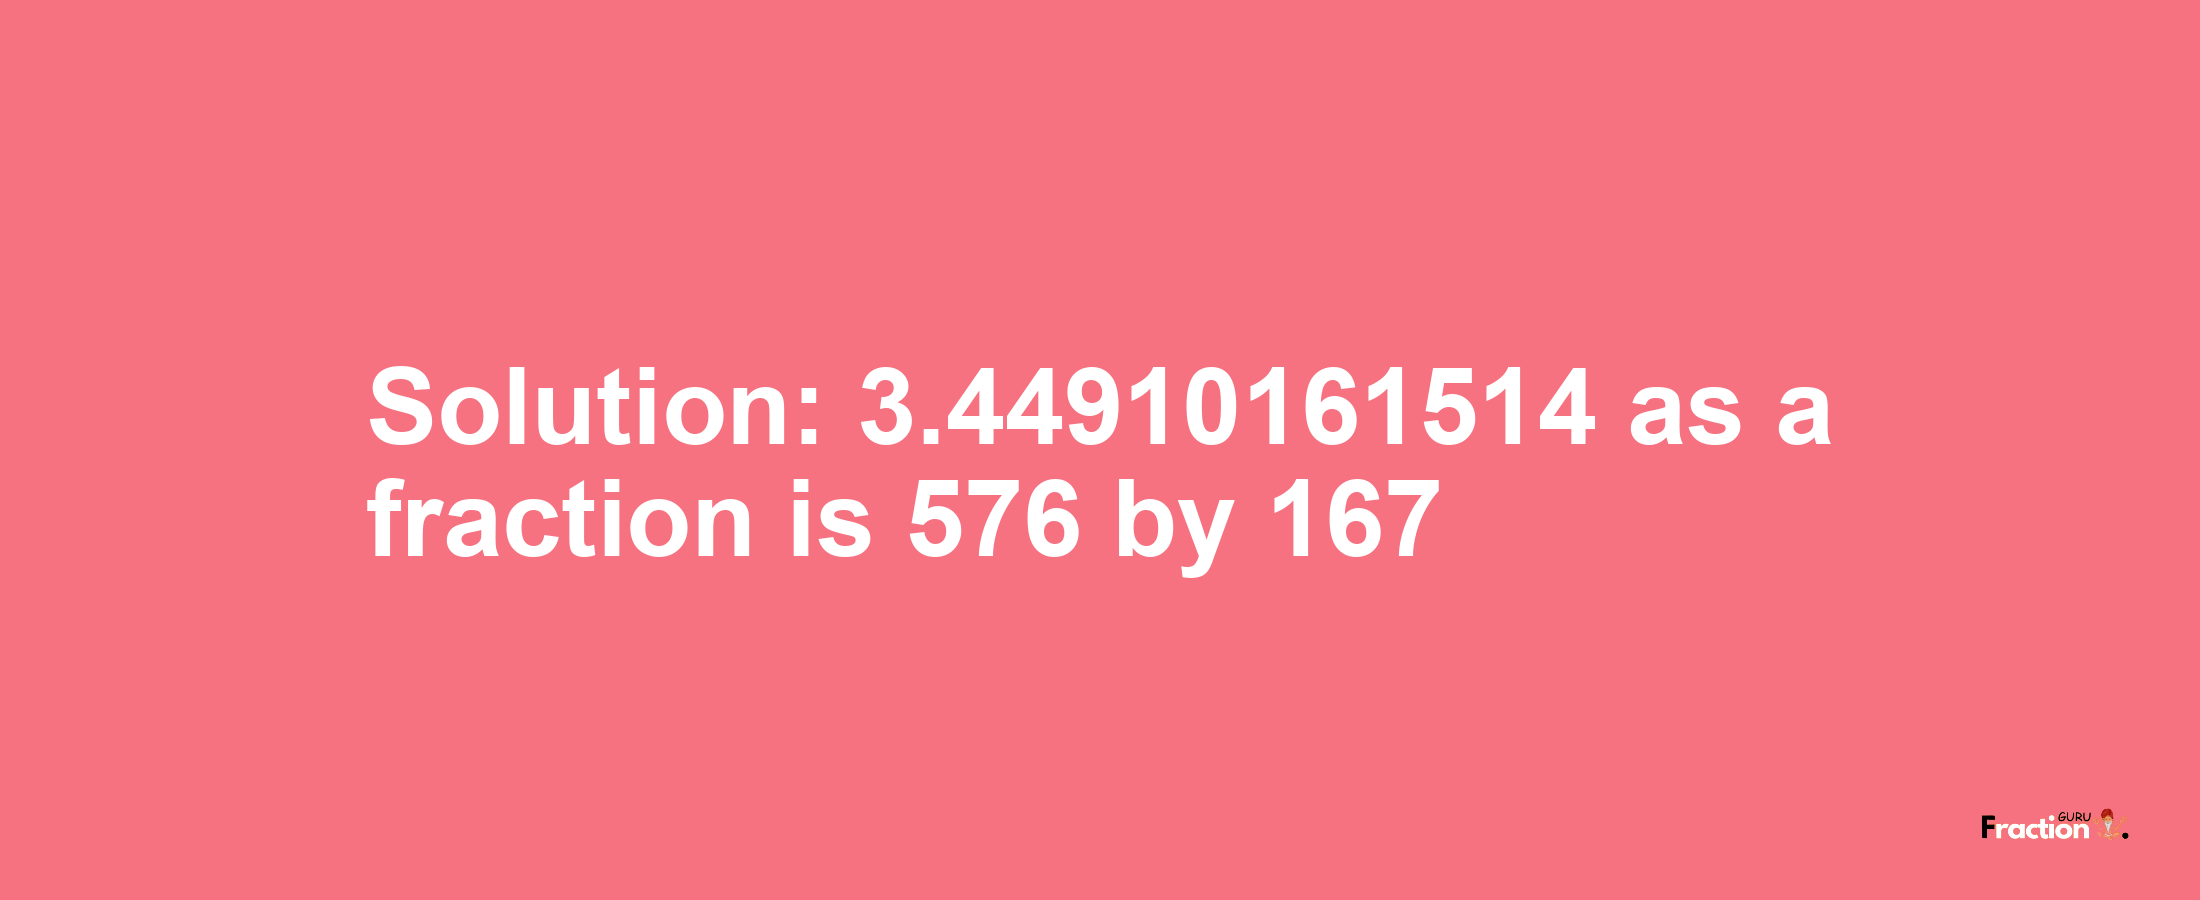 Solution:3.44910161514 as a fraction is 576/167